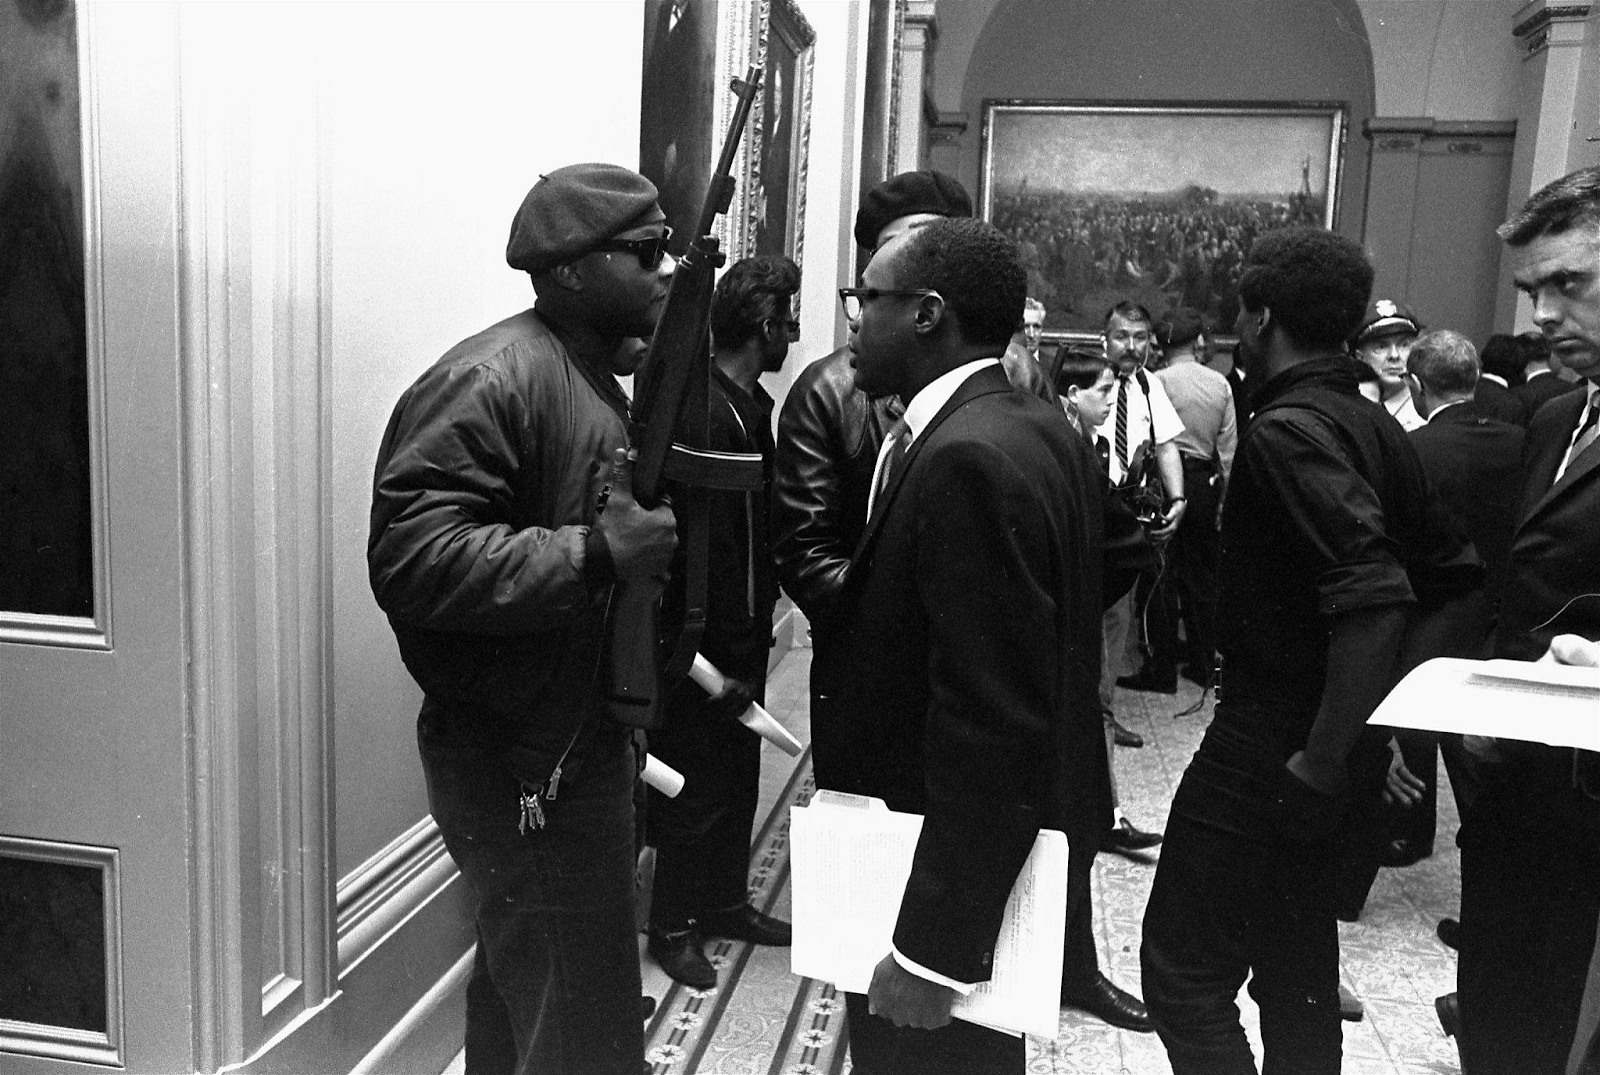 Black Panthers protesting at the California Assembly in May 1967.